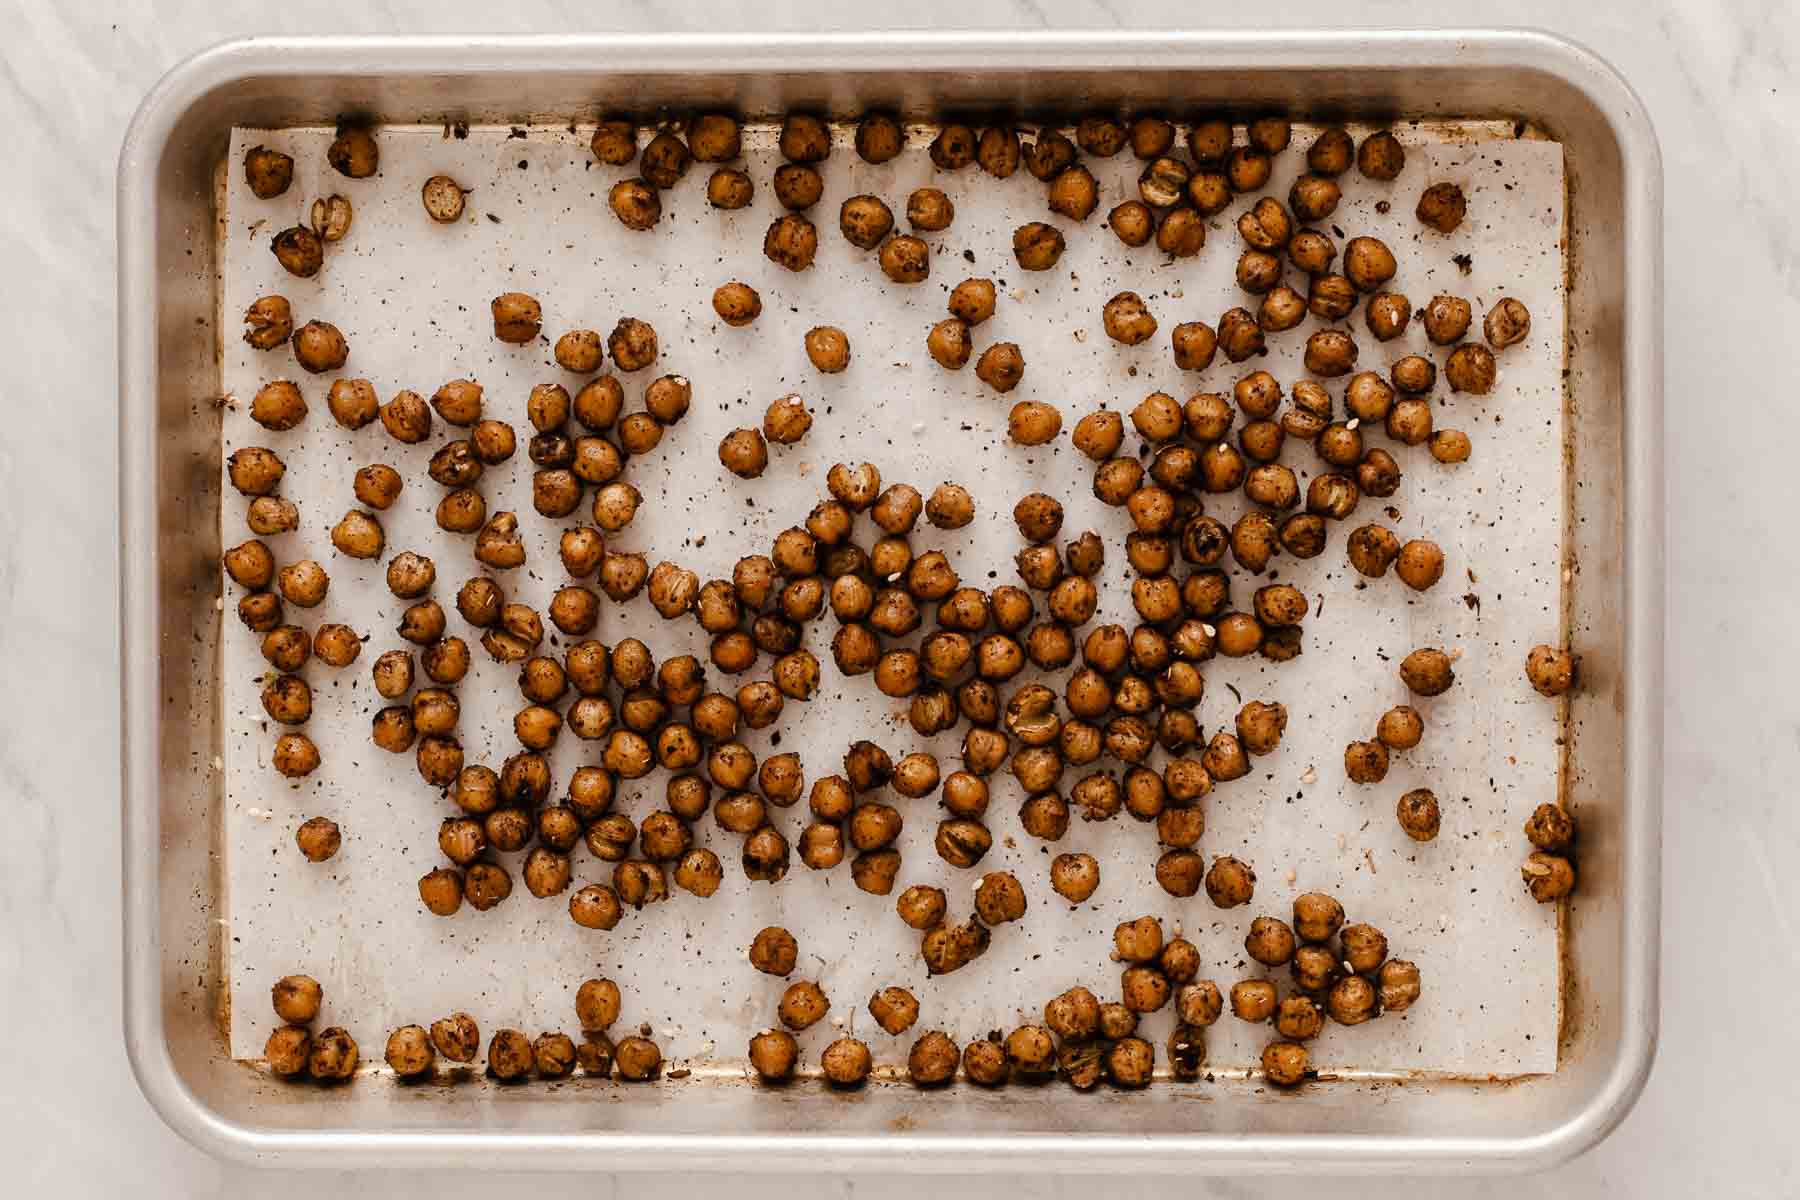 Chickpeas roasted in za'atar spice on baking sheet.